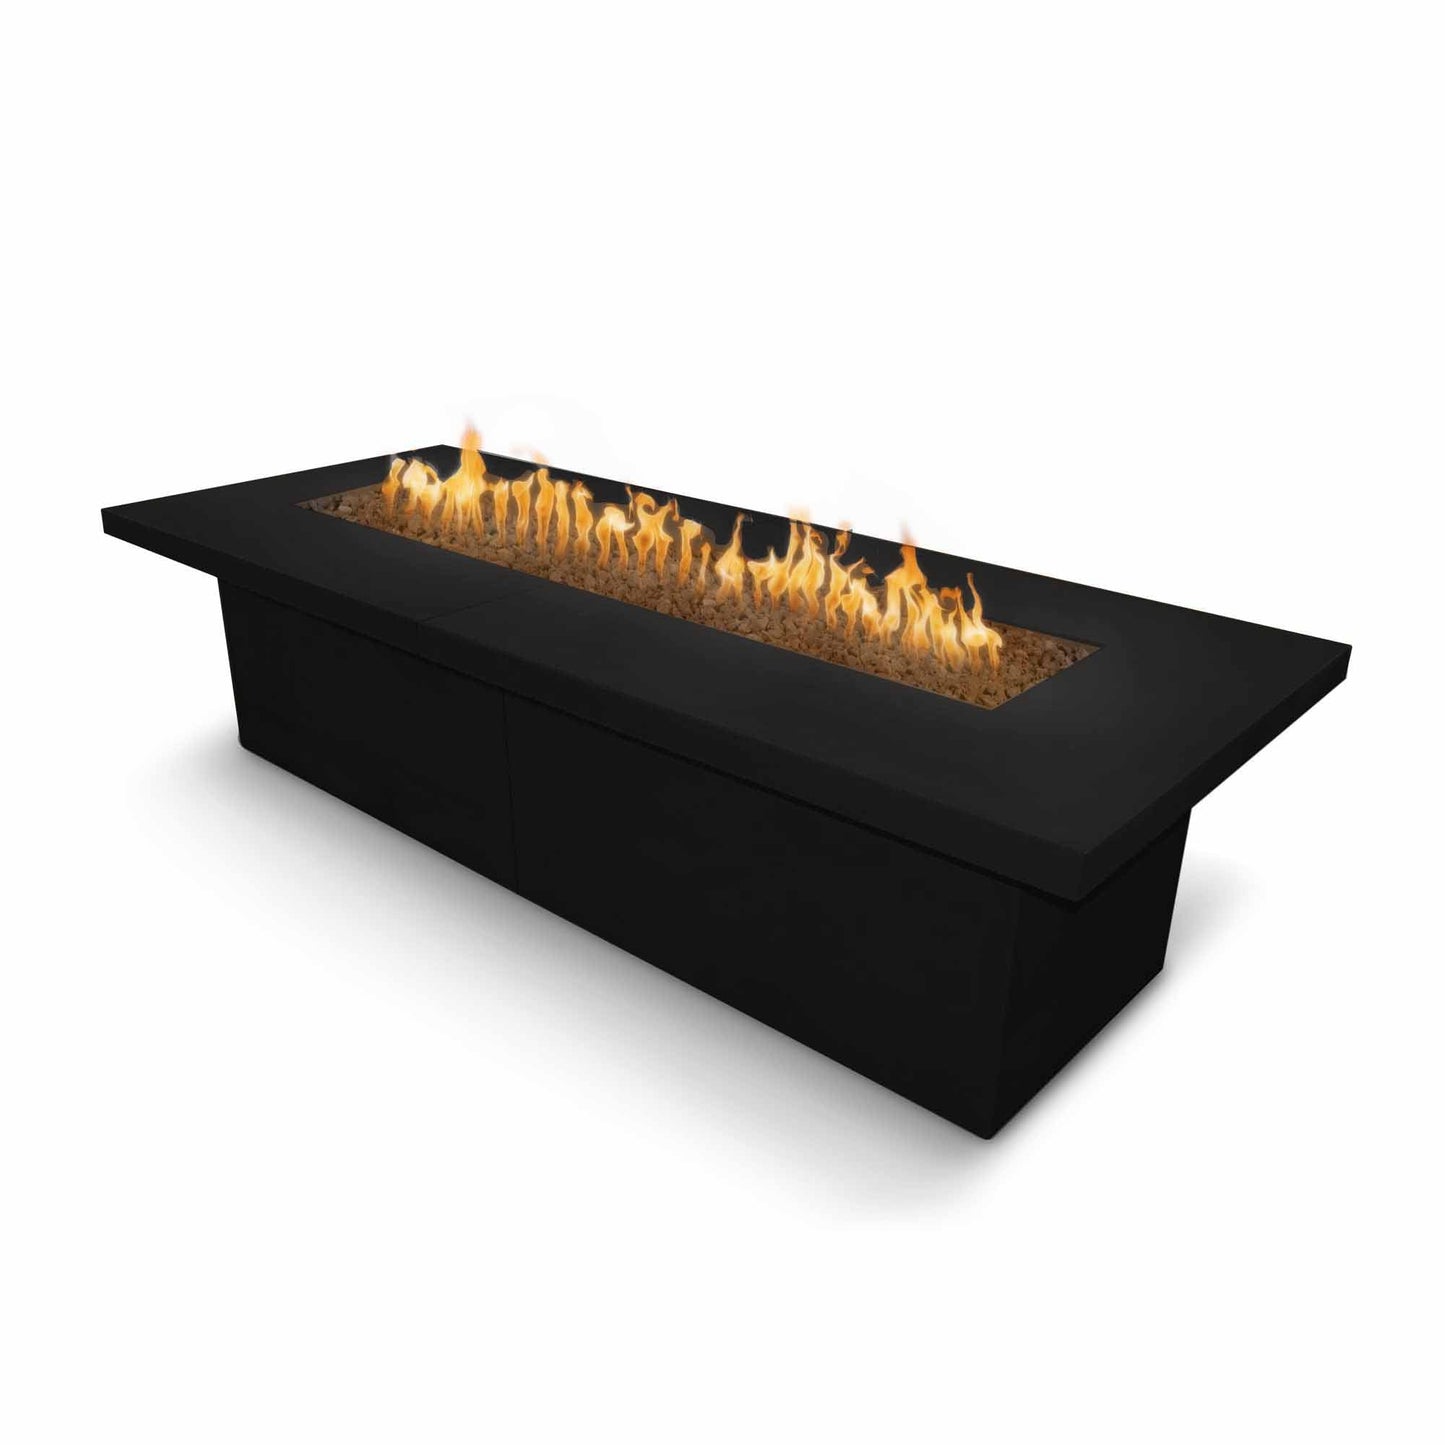 The Outdoor Plus Rectangular Newport 72" Copper Vein Powder Coated Metal Liquid Propane Fire Pit with 110V Electronic Ignition